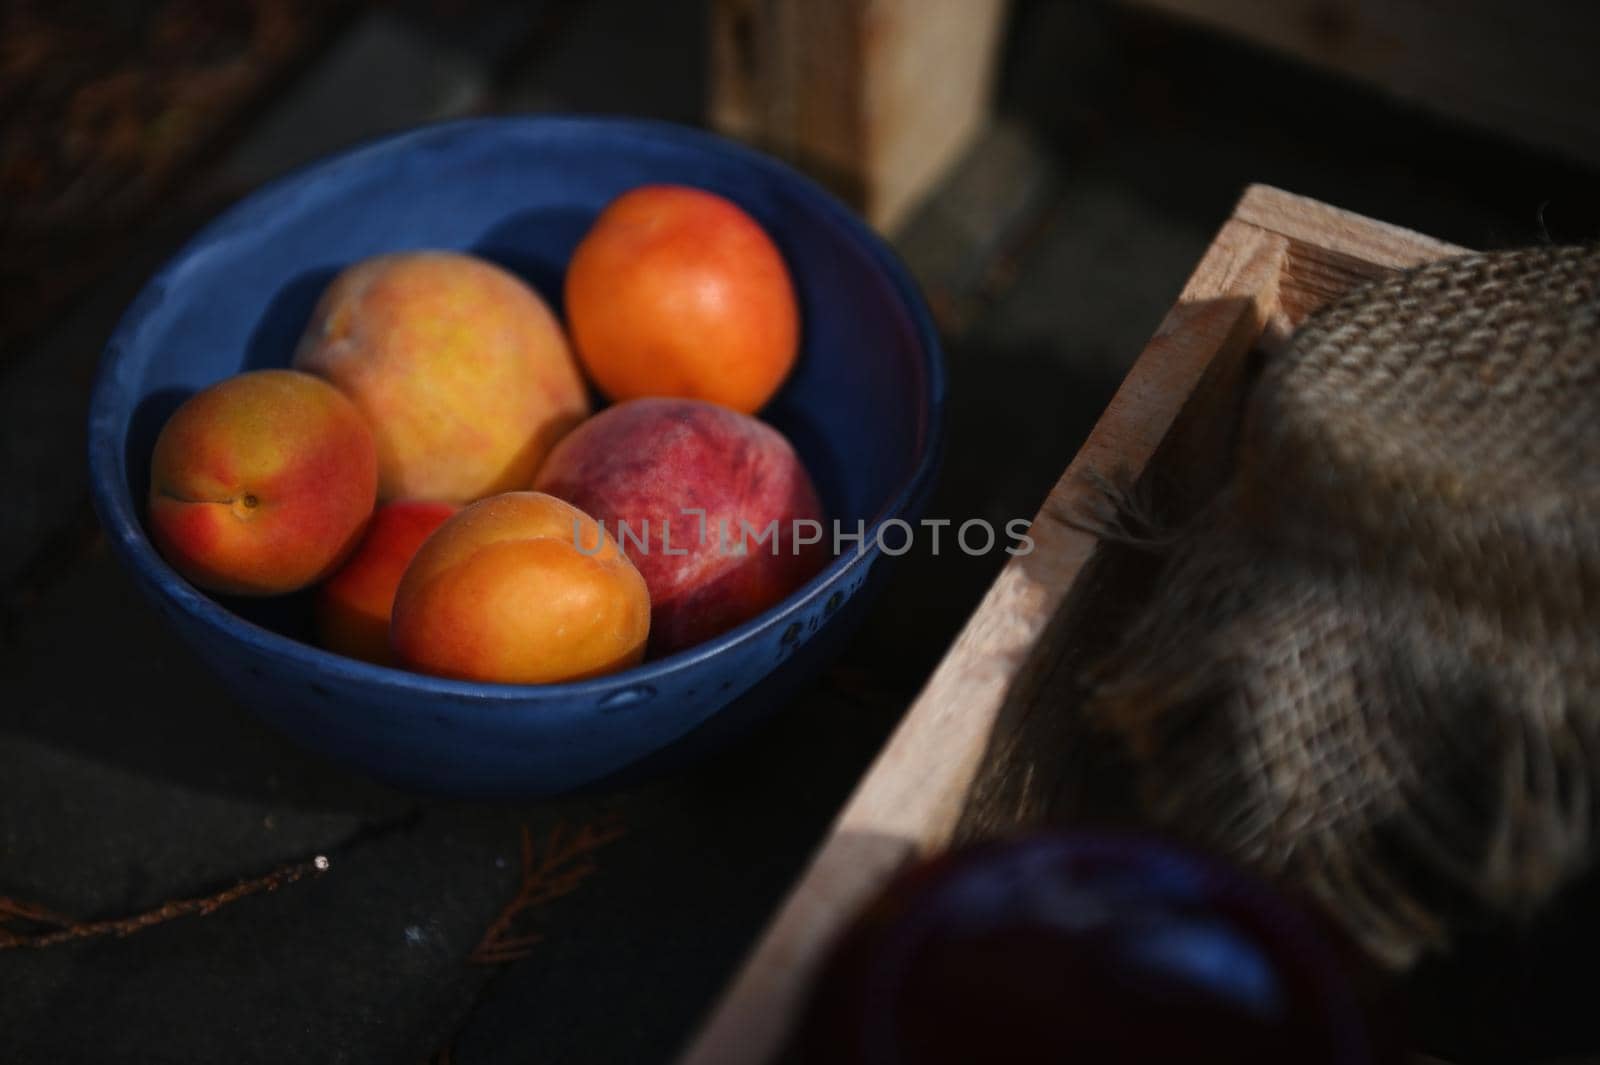 Focus on ripe, juicy, red, sunny and ready-to-eat apricots from organic farm in blue ceramic bowl next to a wooden box with homemade fruit jam jars. Healthy food, sweet canned food and canning concept